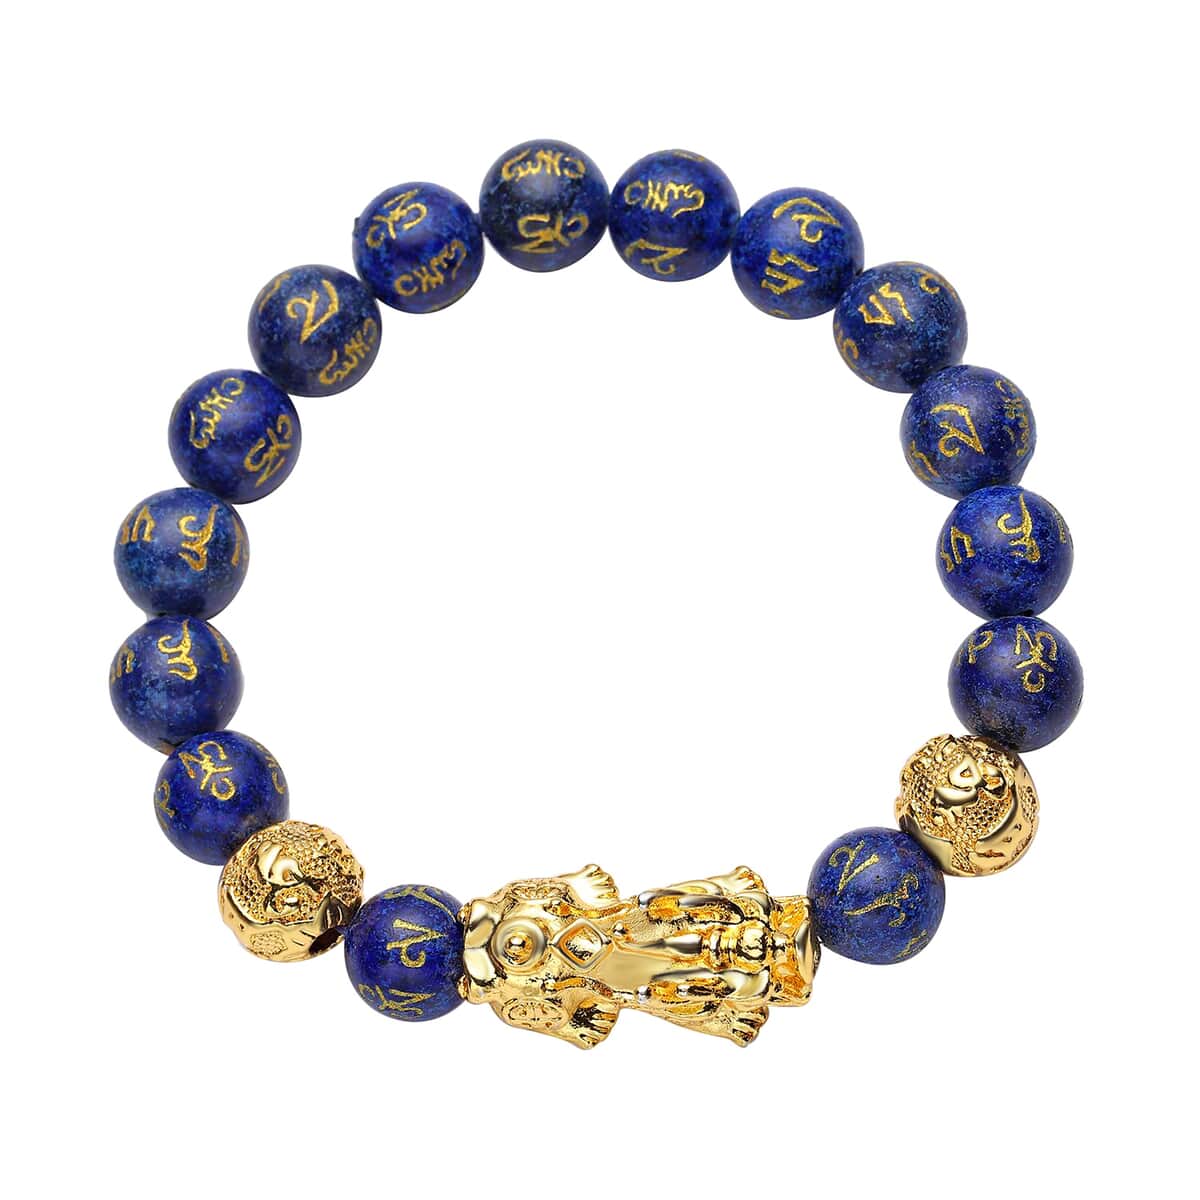 Feng Shui Pixiu Charm Lapis Lazuli Carved Beads Stretch Bracelet in Goldtone, Stretchable Bracelet, Good Luck Birthday Gift 128.00 ctw image number 0